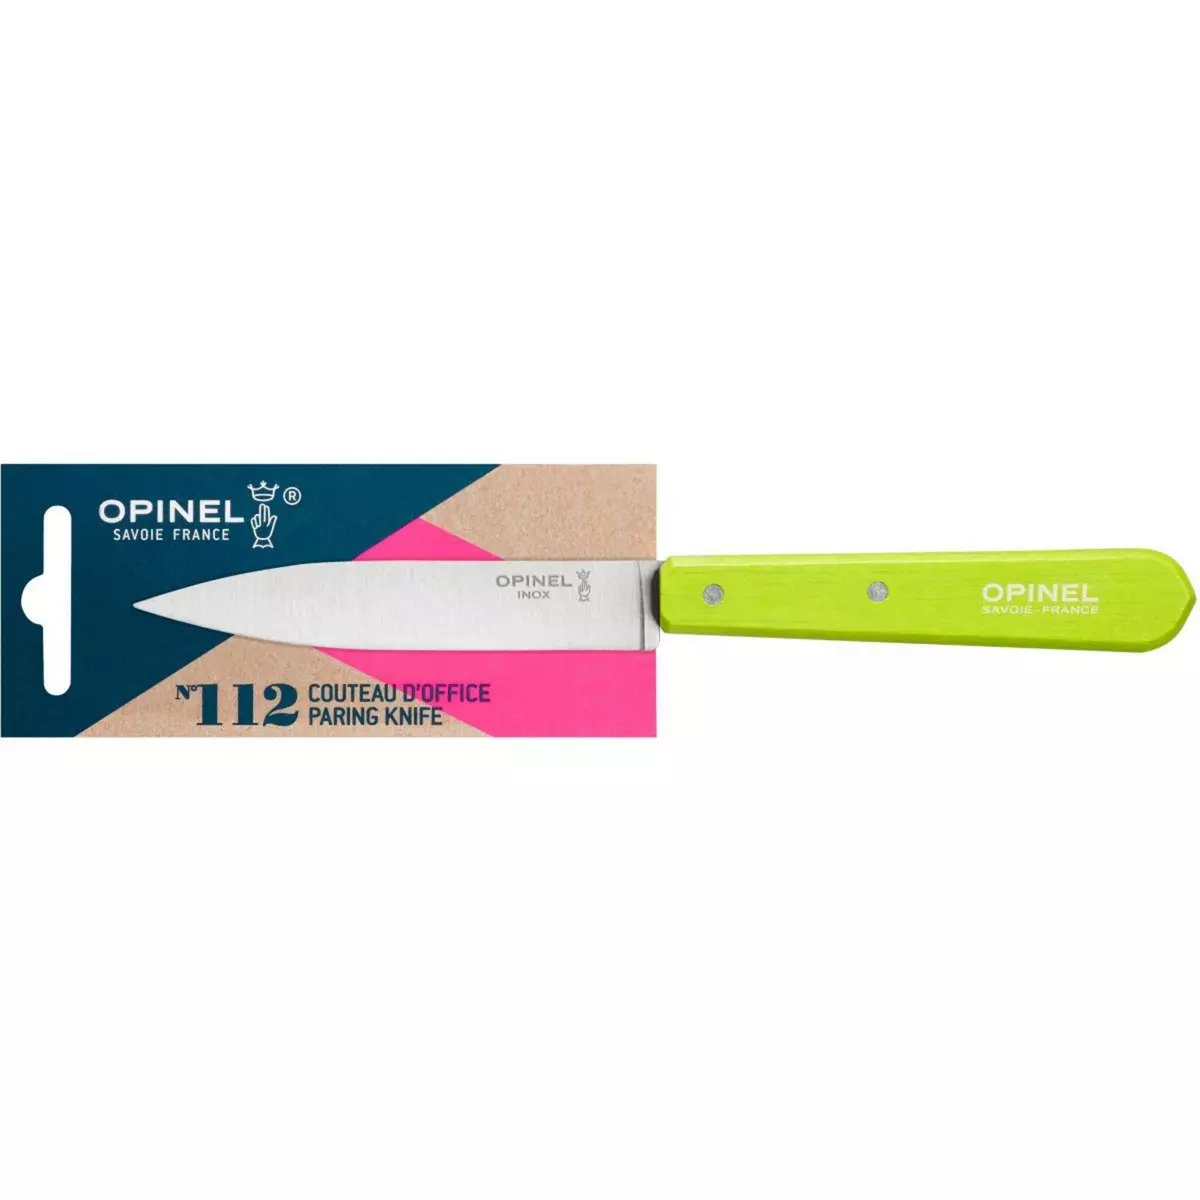 Opinel Couteau d'office no112 pomme